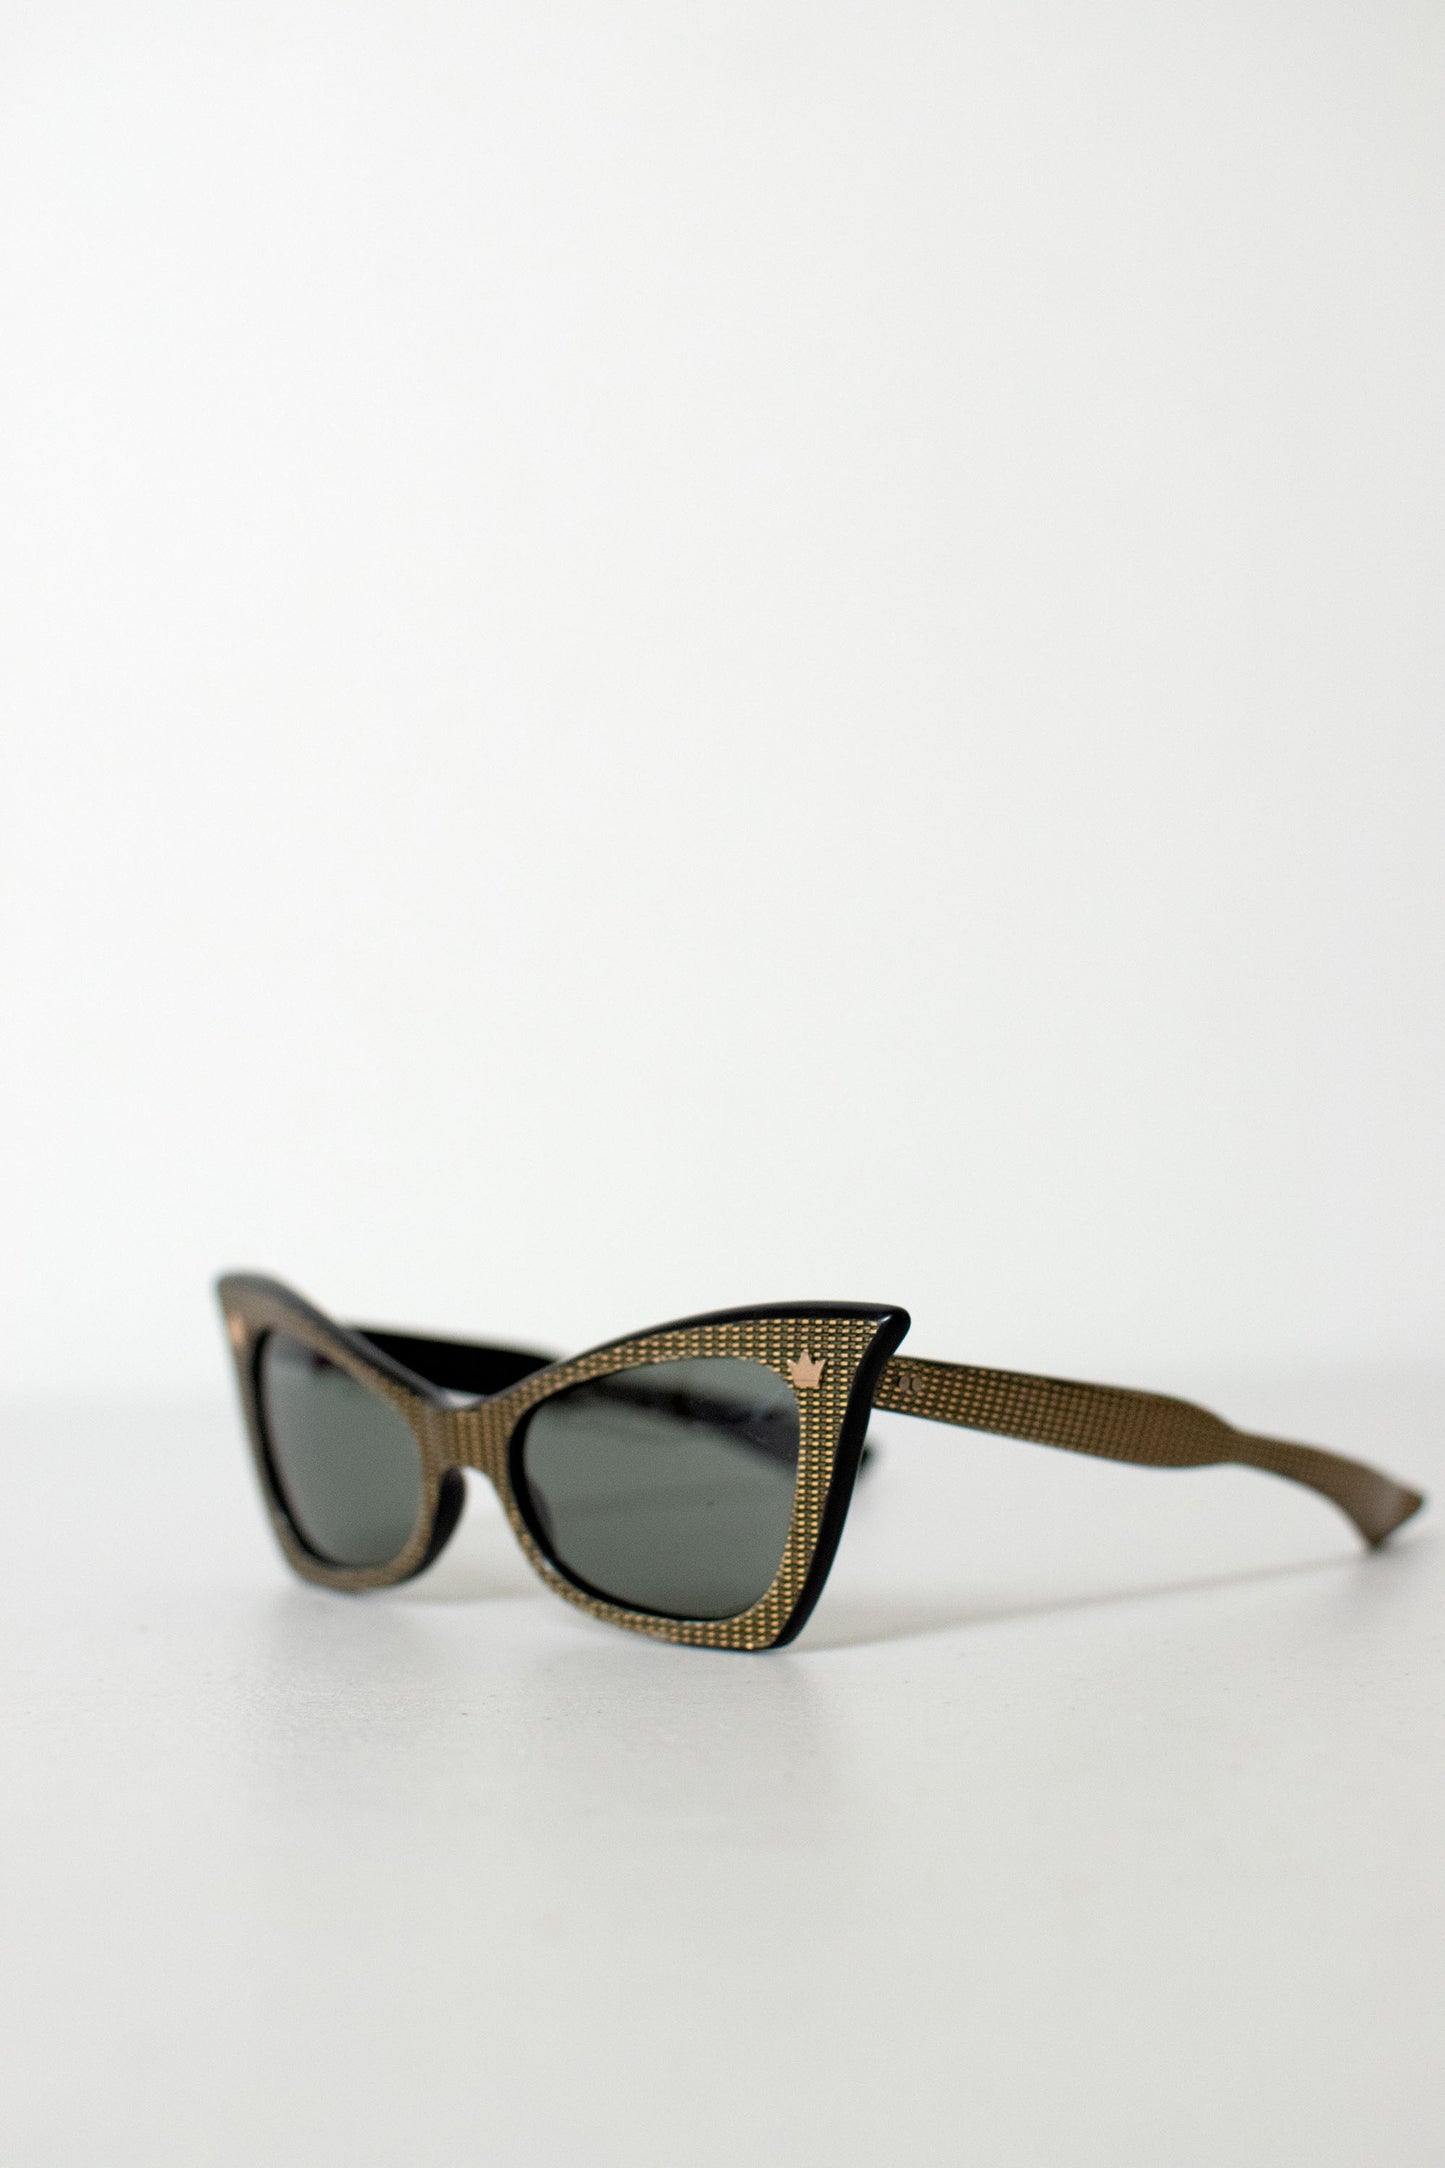 1950s Sunglasses | Black and Gold Cool Ray